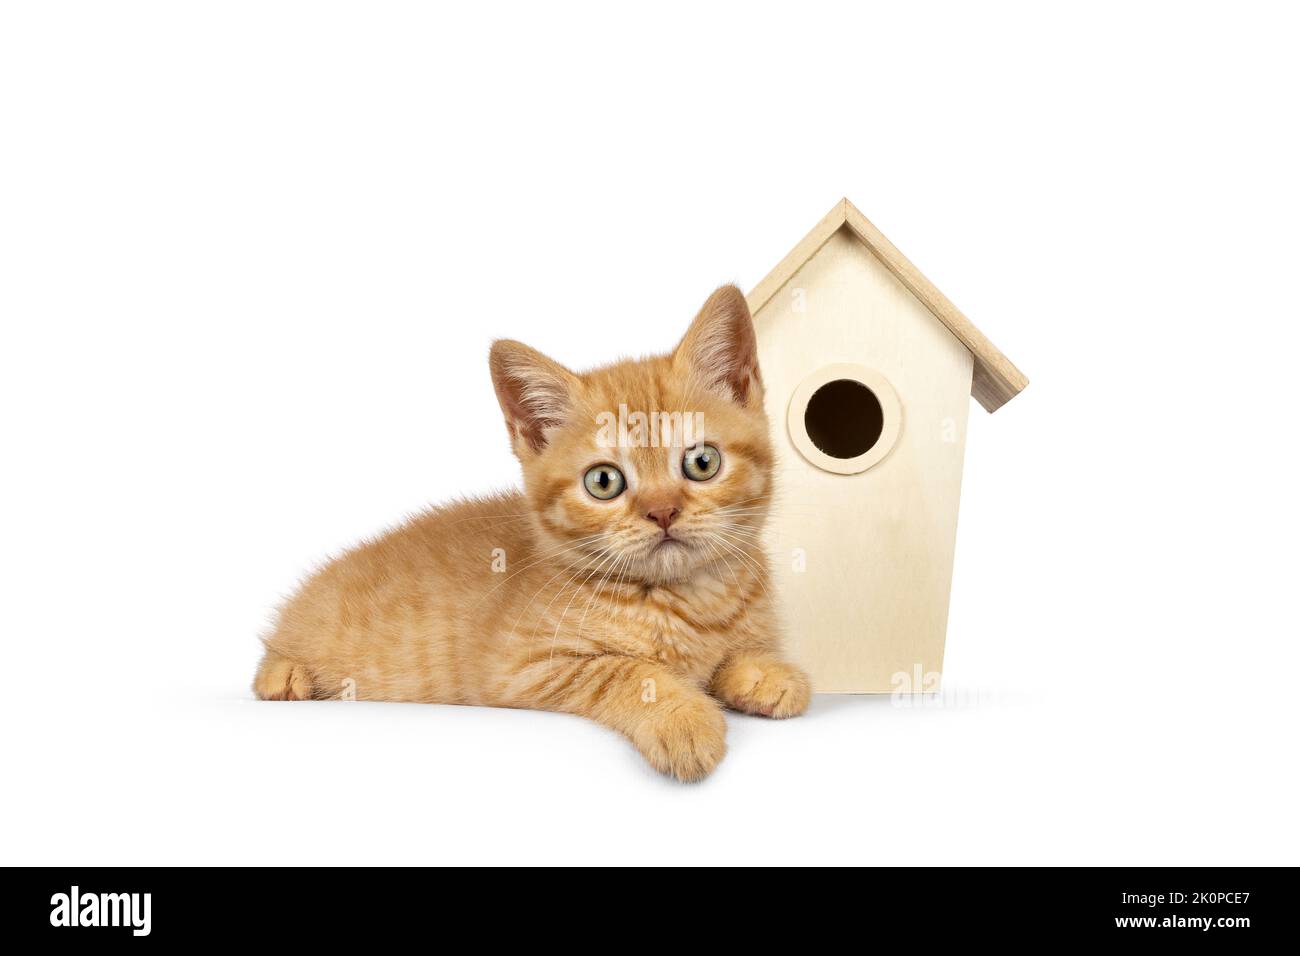 Cute little red British Shorthair cat kitten, laying side ways in front of tiny wooden bird house. Looking straight to camera. Isolated on white backg Stock Photo